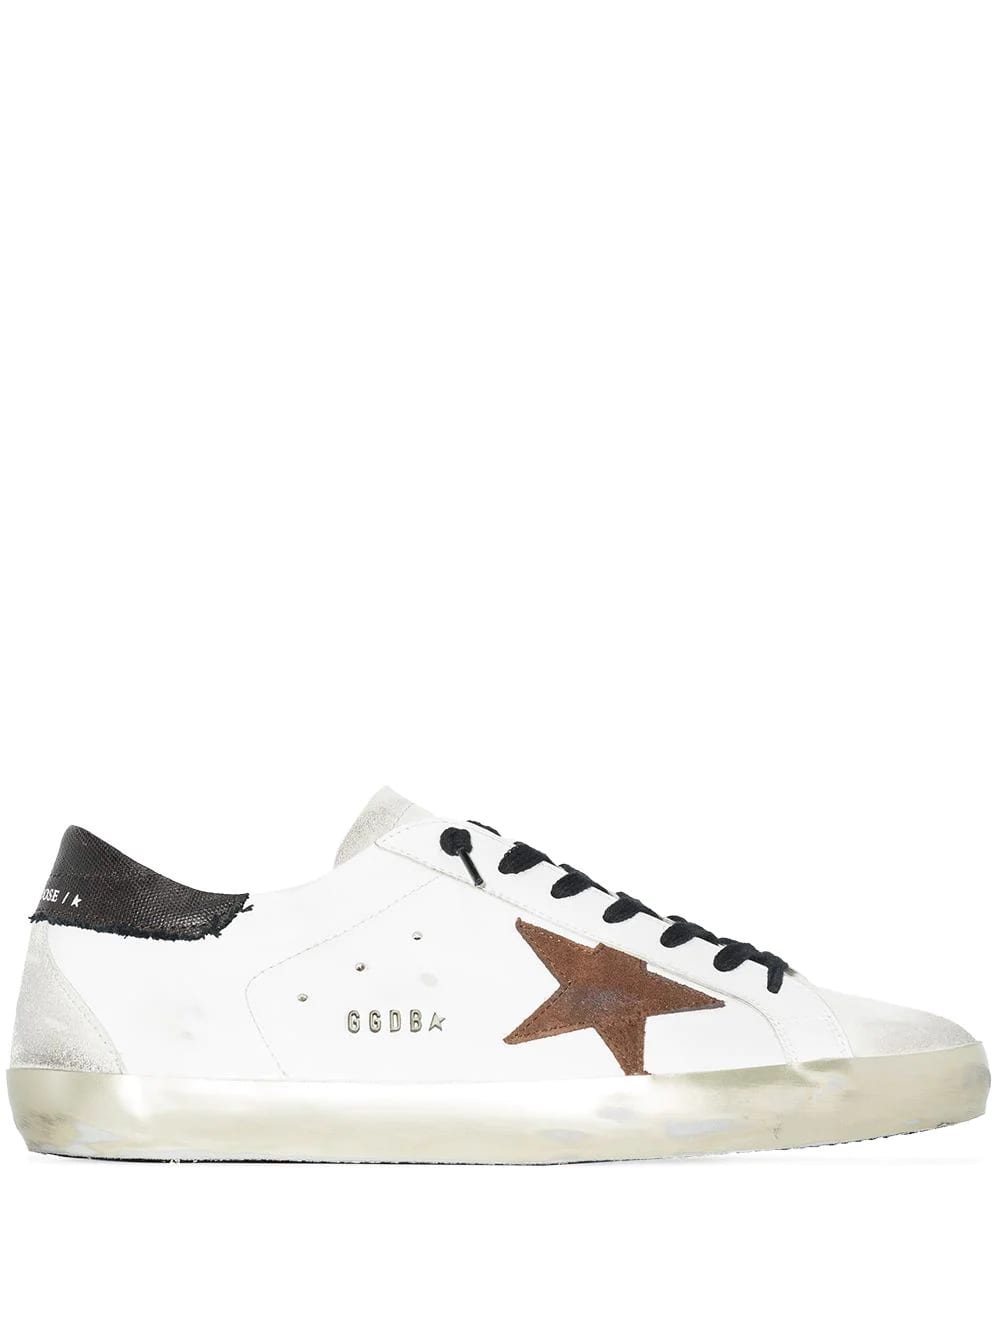 Golden Goose Man White Super-star Sneakers With Black Spoiler And Brown Suede Star